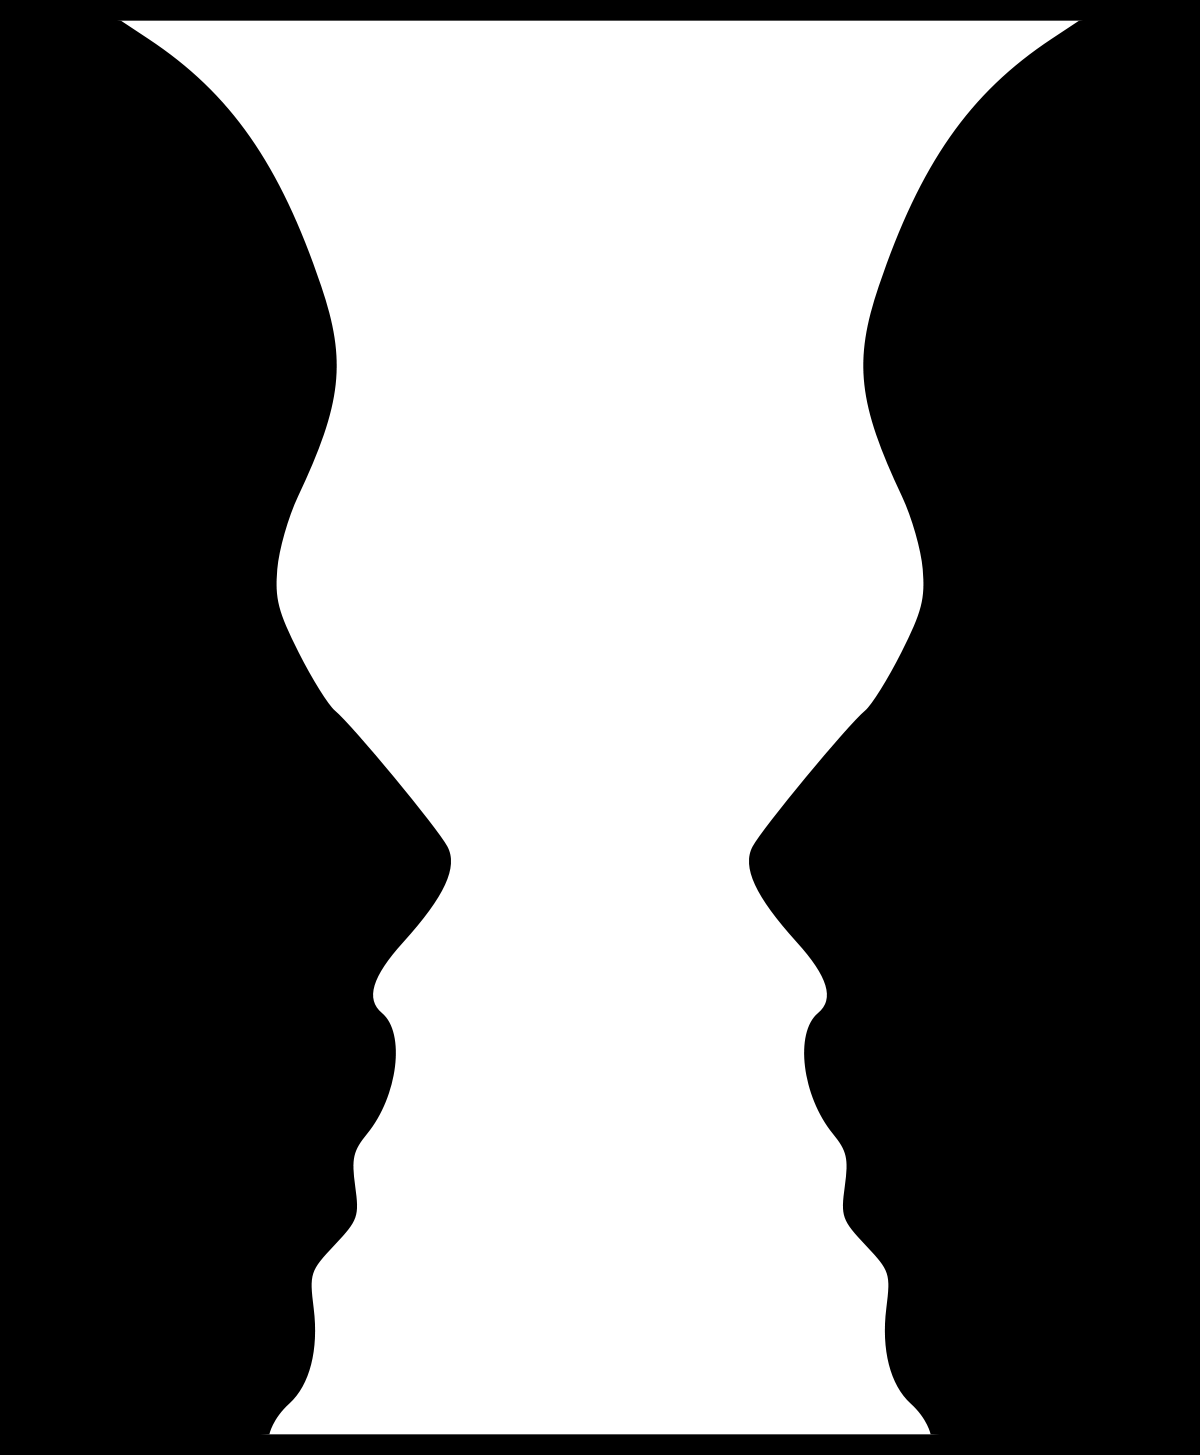 Image that can be seen as silhouettes of two faces or a white vase in between